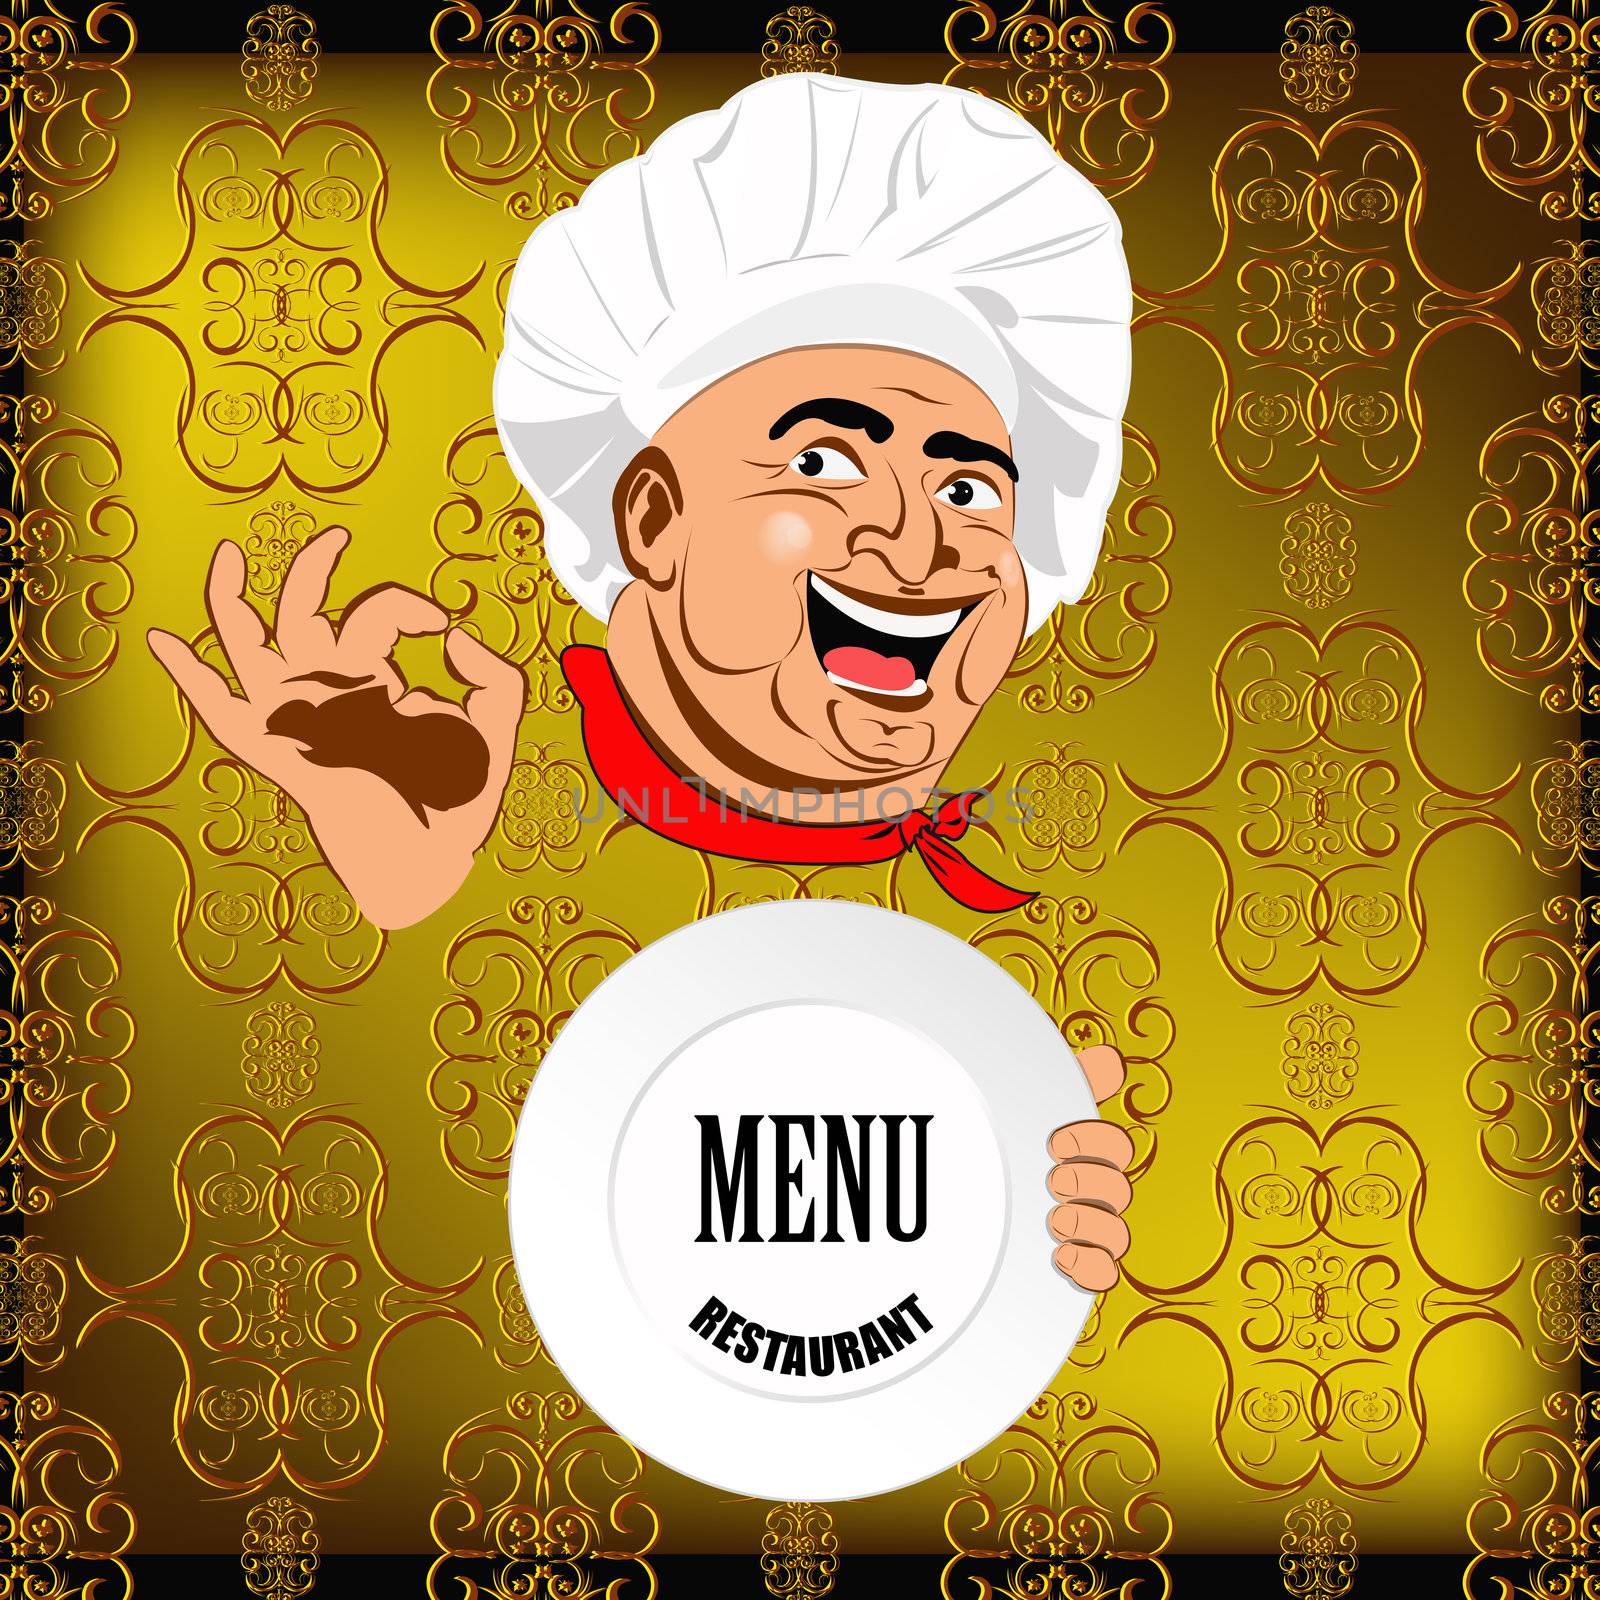 Eastern Chef and big plate on a abstract decorative background by sergey150770SV